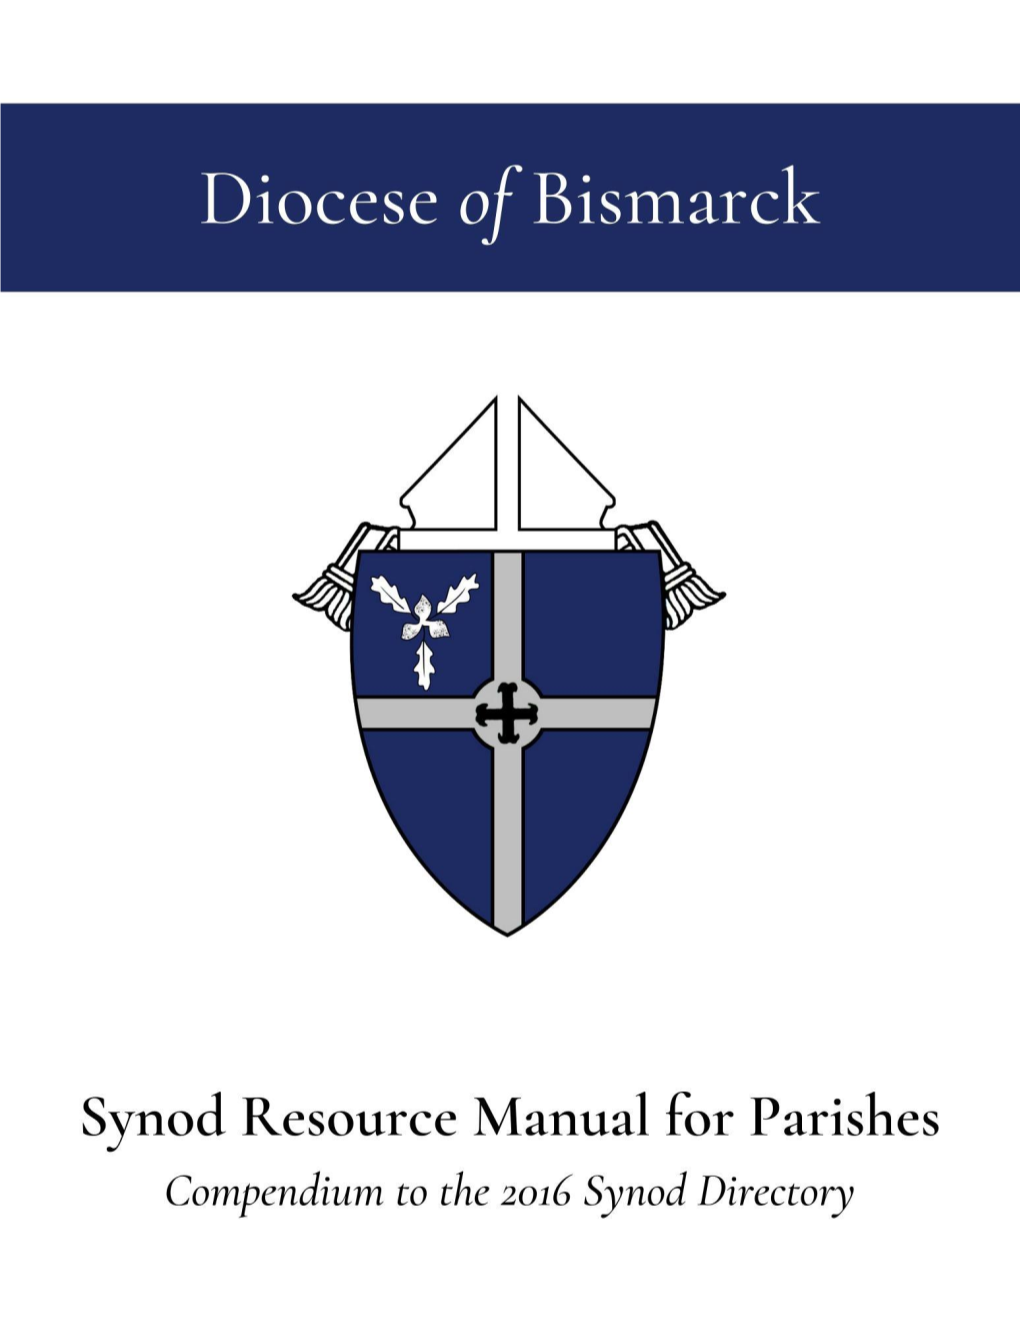 Synod Resource Manual for Parishes” As a Compendium to the 2016 Synod Directory